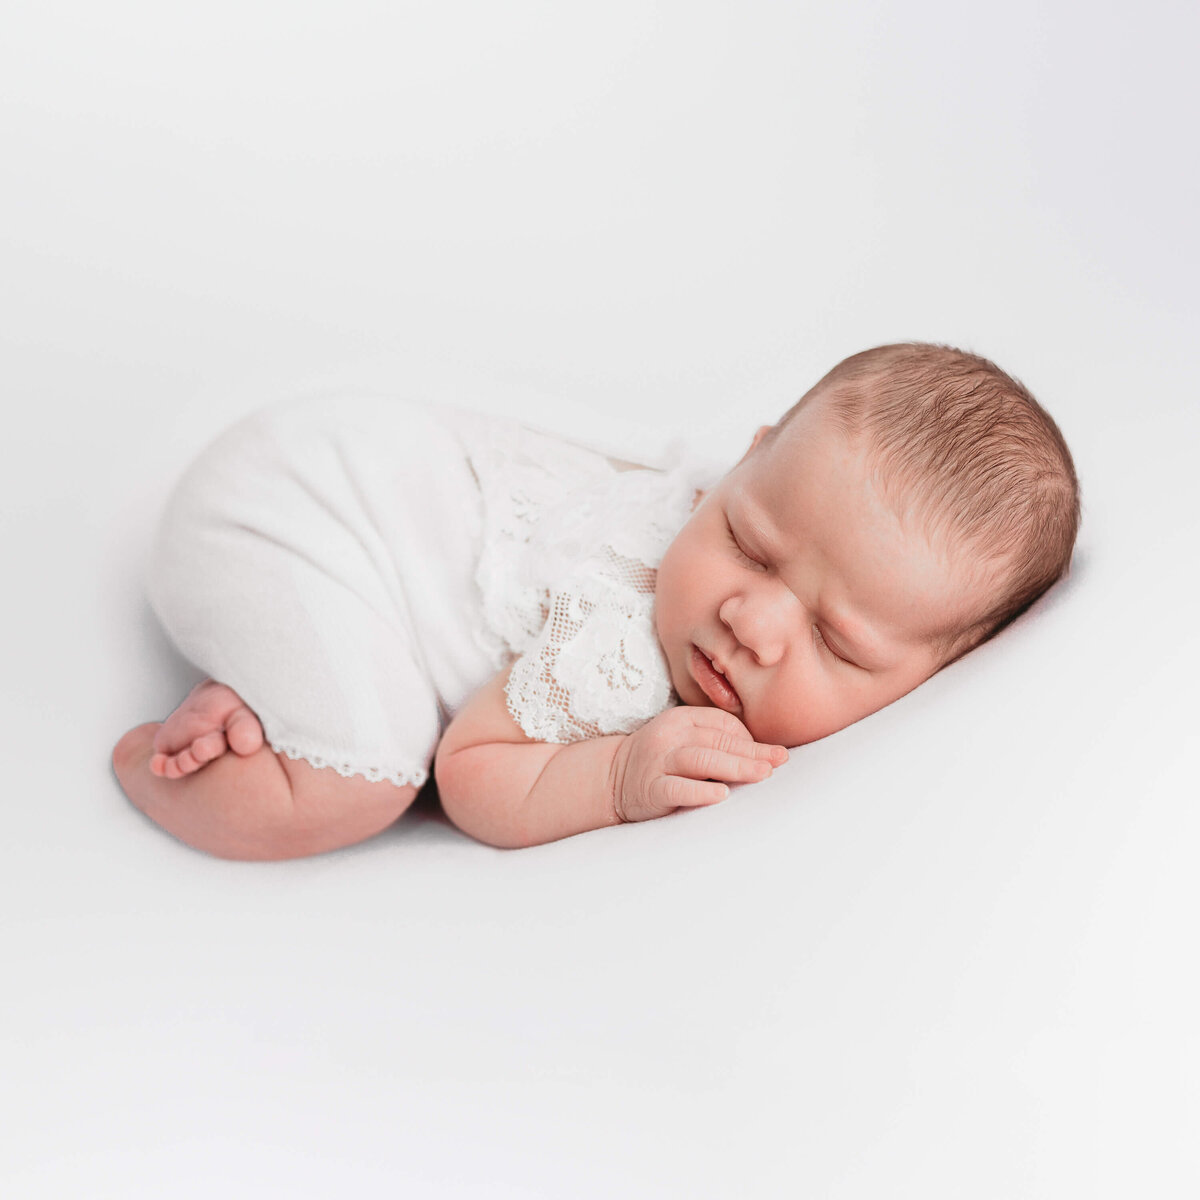 Sleeping baby girl posed for newborn photography session with Lauren Vanier Photography in Hobart, Tasmania